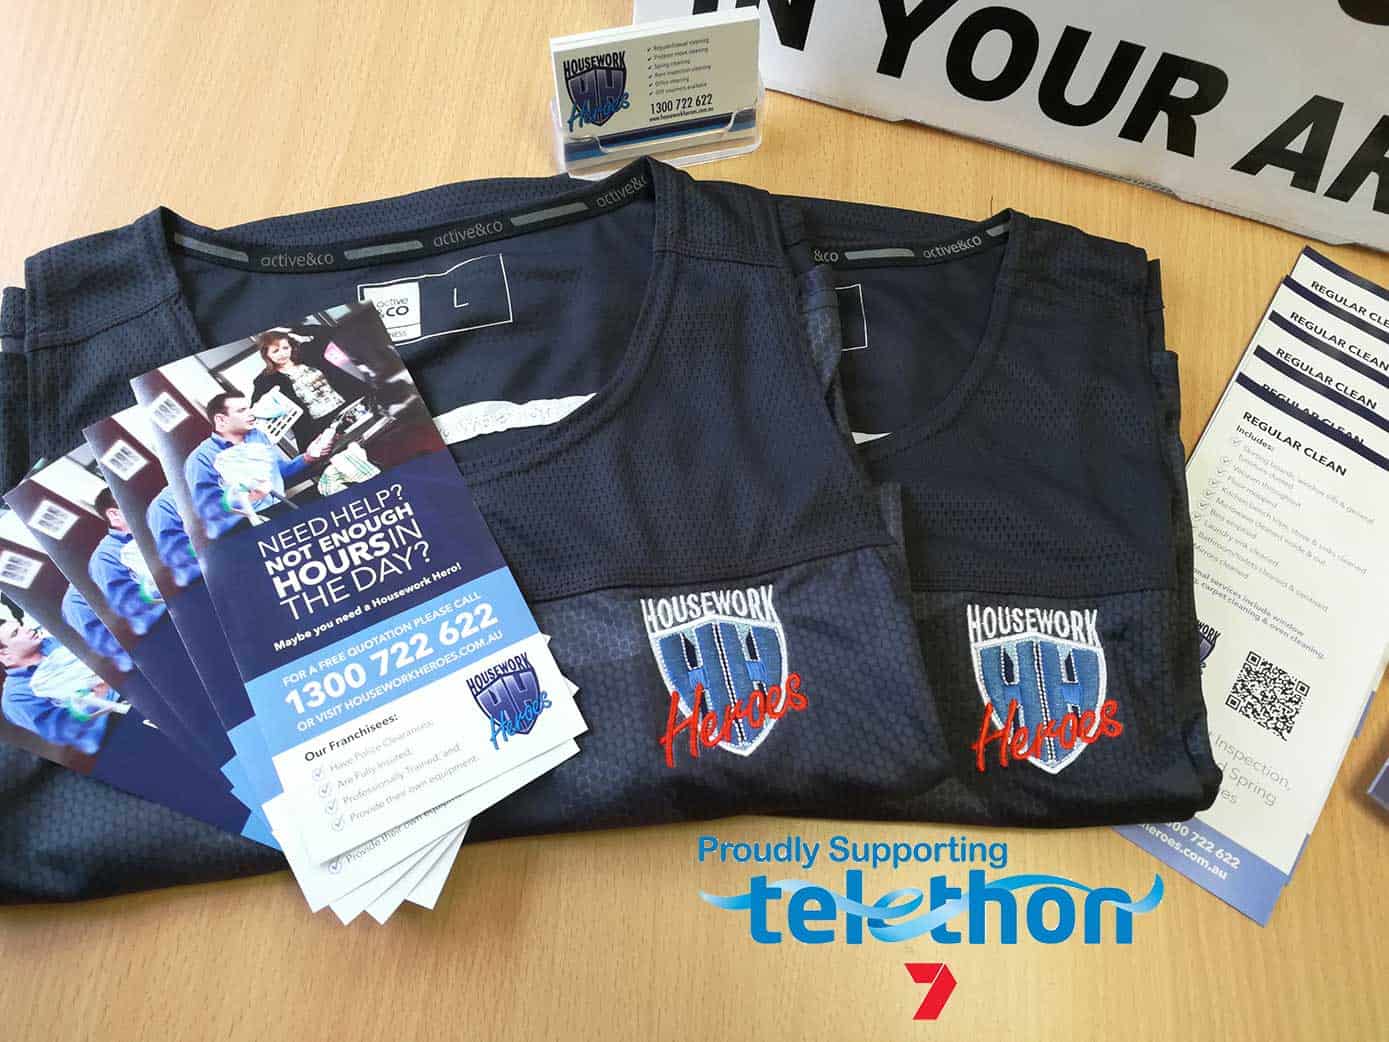 Housework Heroes Charity Kit for Safety Bay's Telethon Challenge